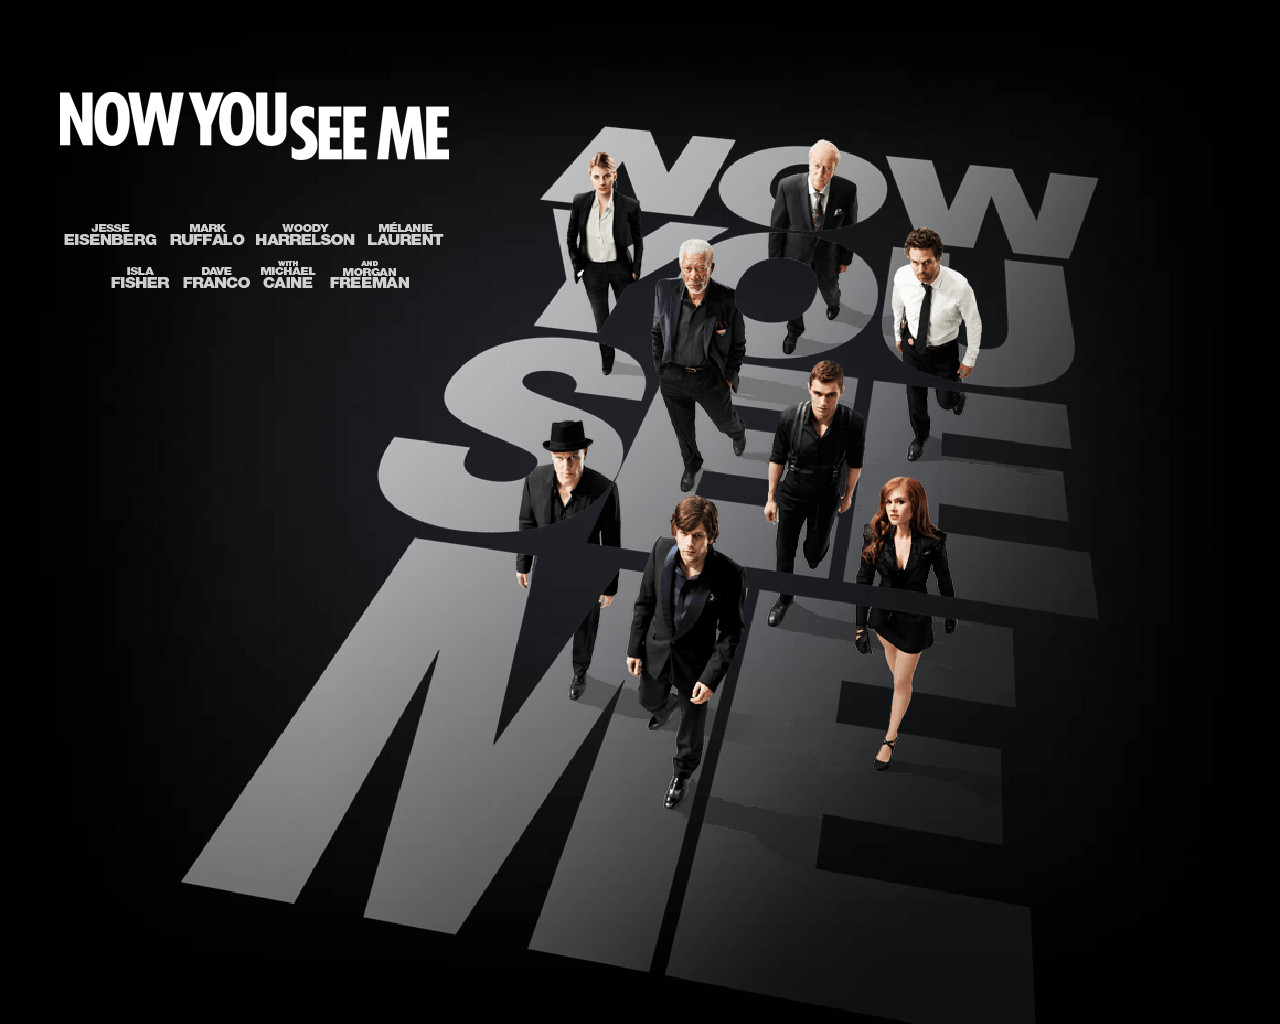 When I rented the movie “Now You See Me,” I wasn't expecting anything different than the usual Hollywood movie; I remembered some one-dimensional ...